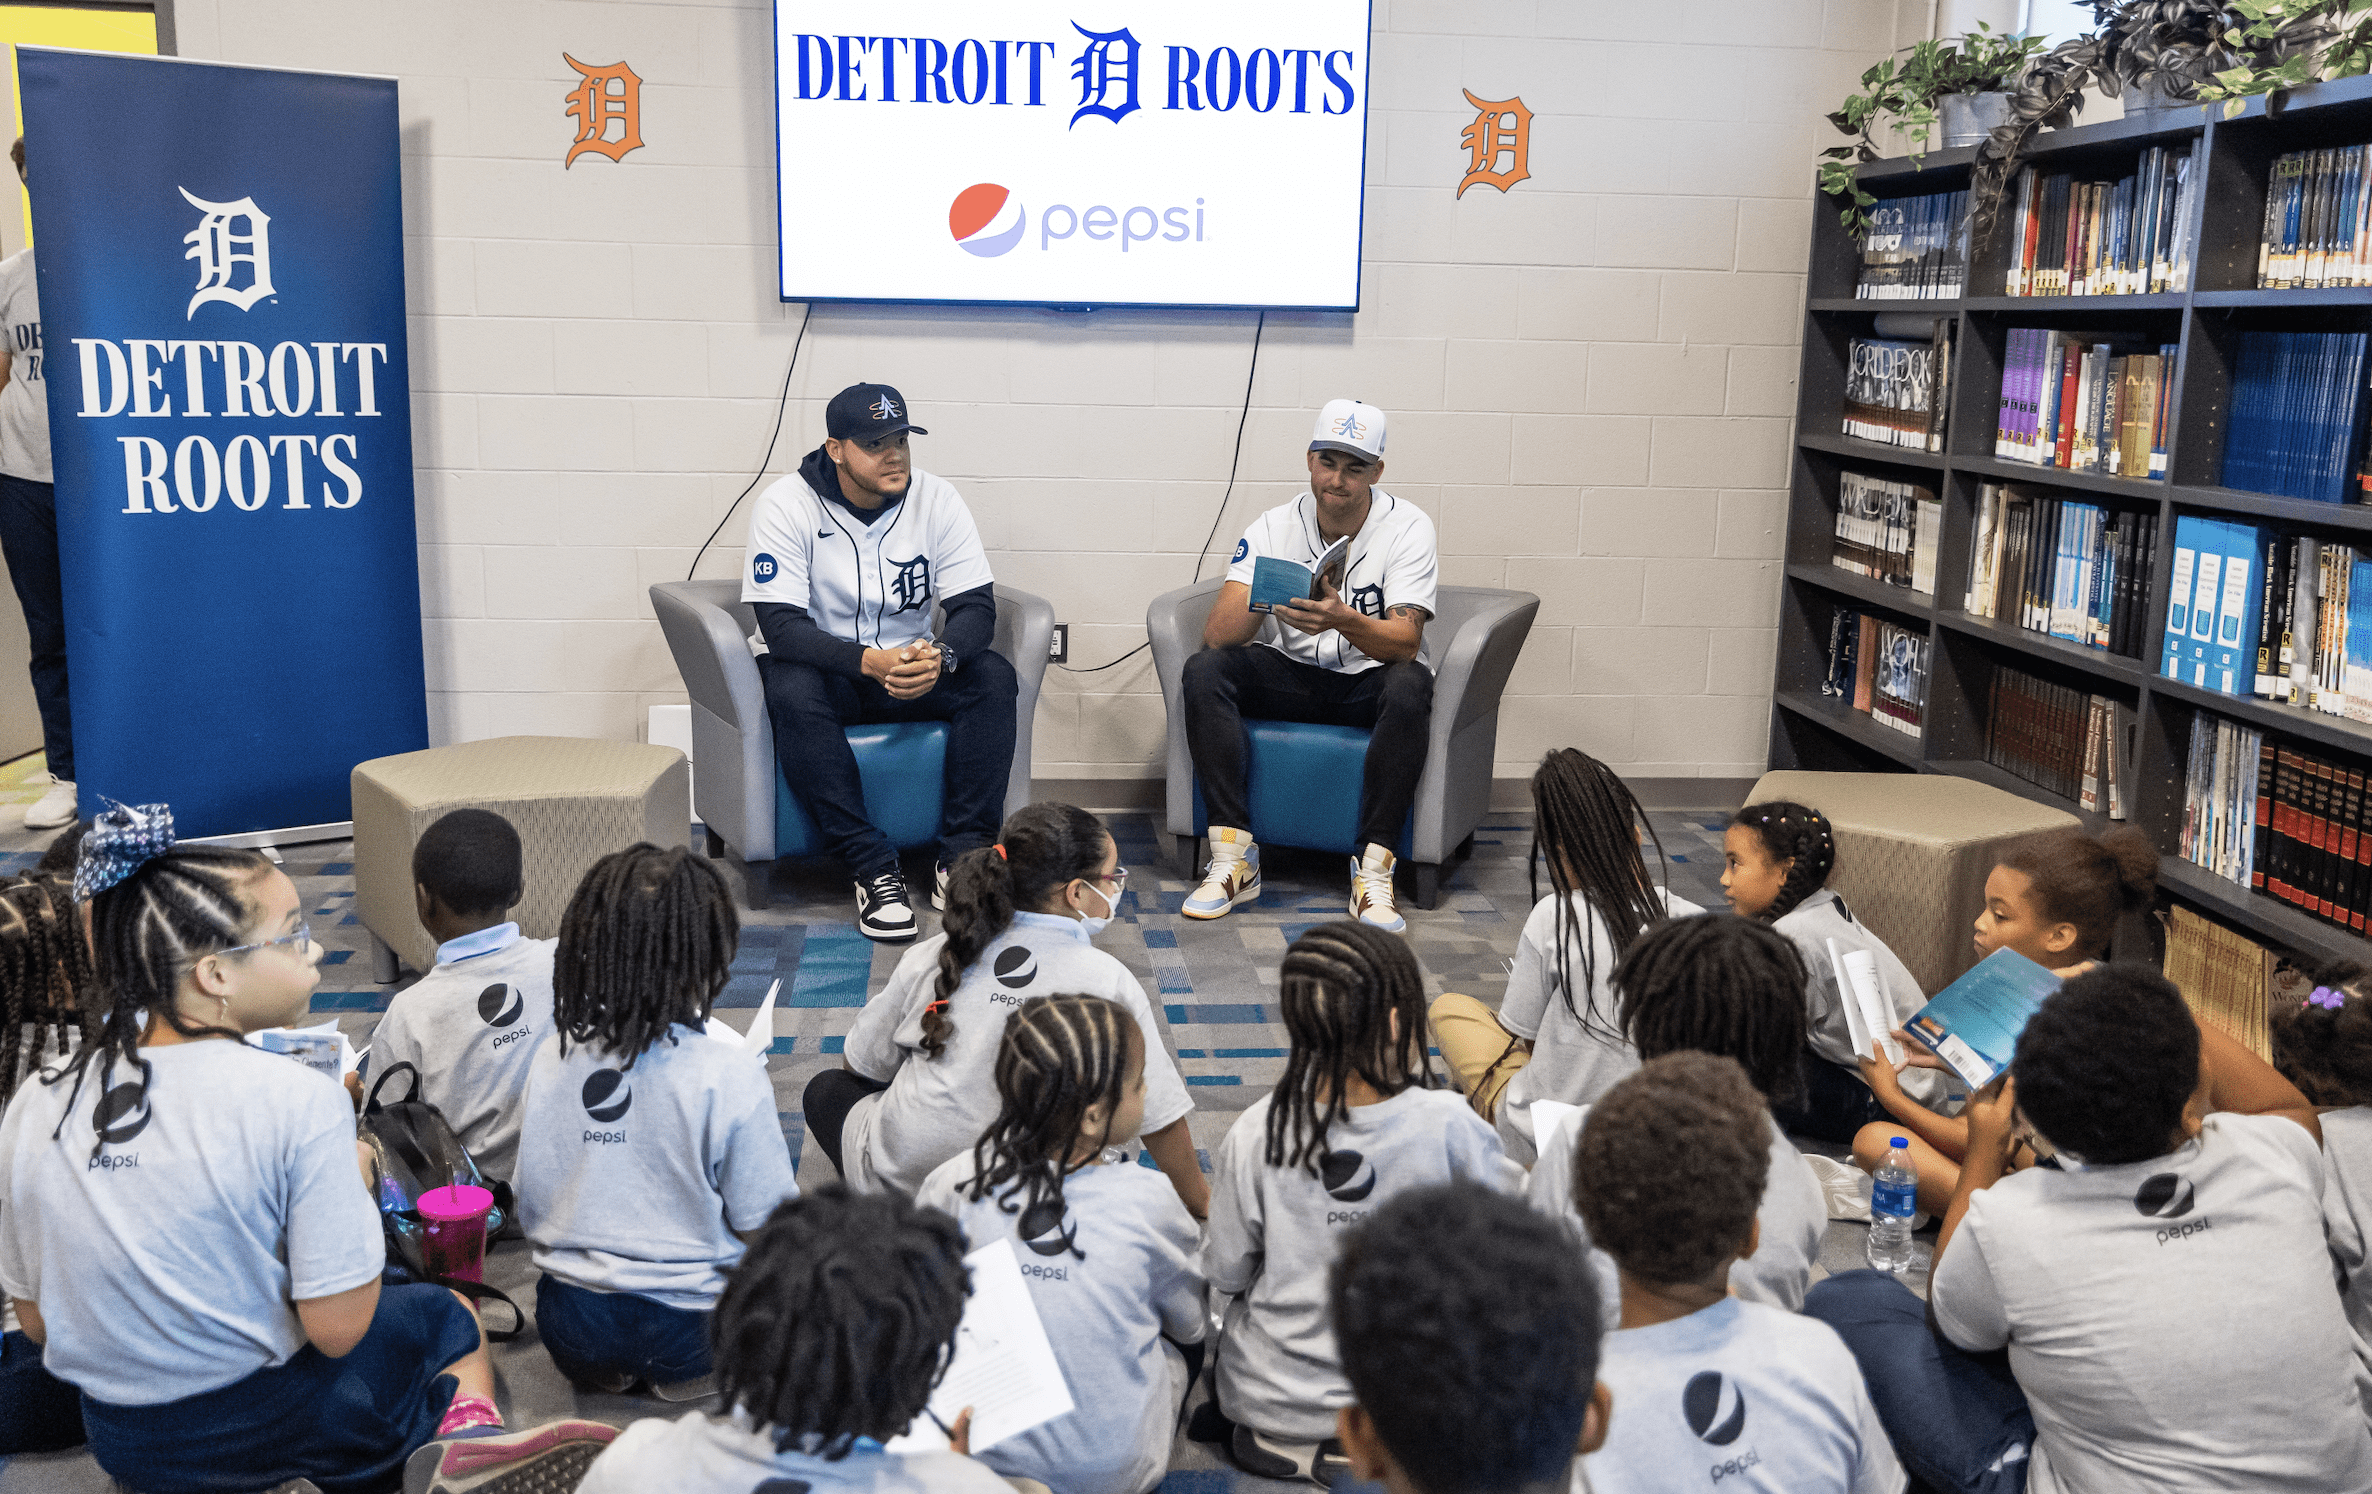 Detroit Tigers and Nike to Celebrate Play Ball Detroit Success